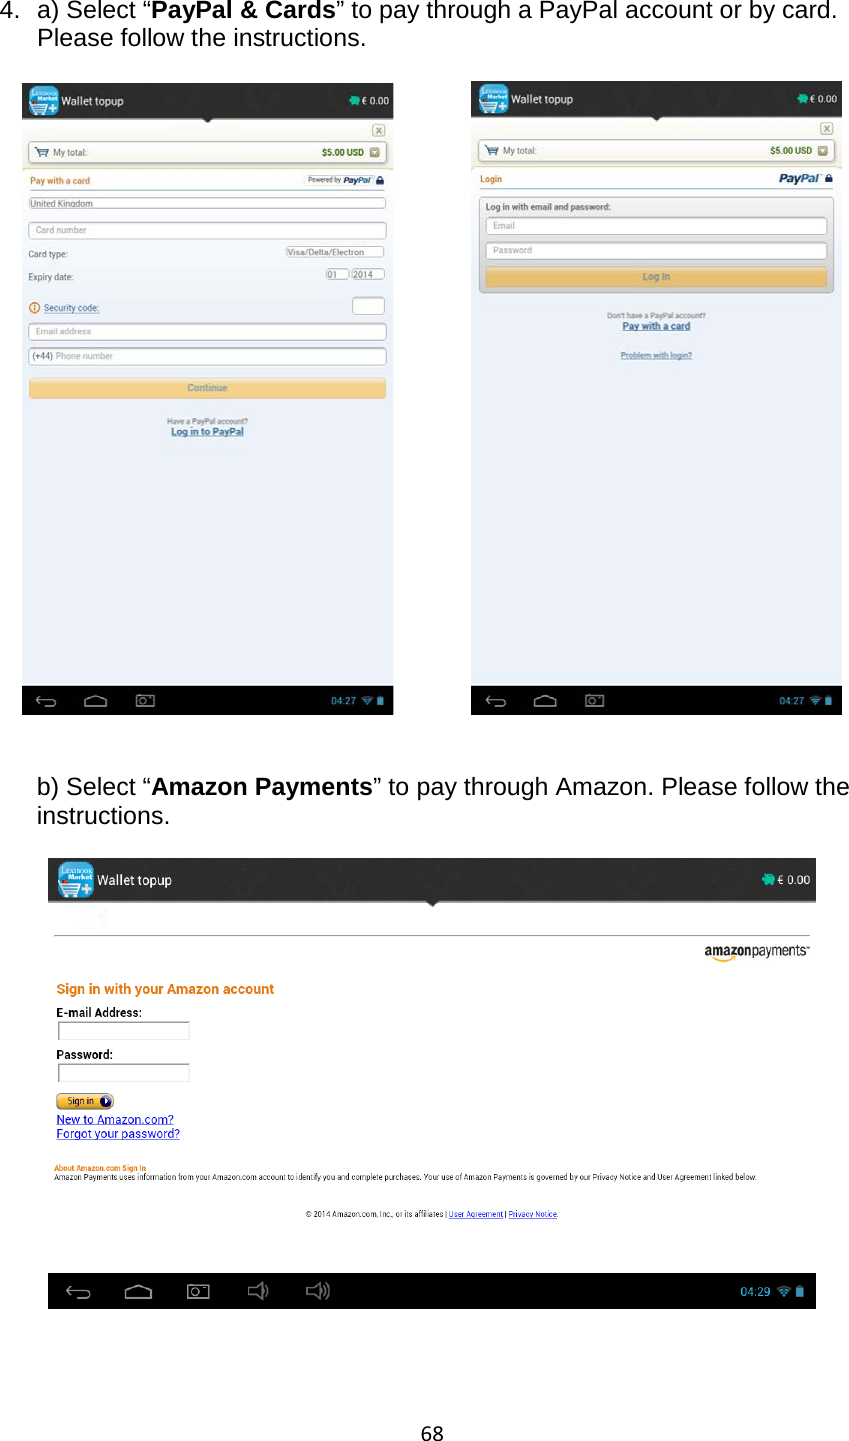 68  4. a) Select “PayPal &amp; Cards” to pay through a PayPal account or by card. Please follow the instructions.        b) Select “Amazon Payments” to pay through Amazon. Please follow the instructions.       